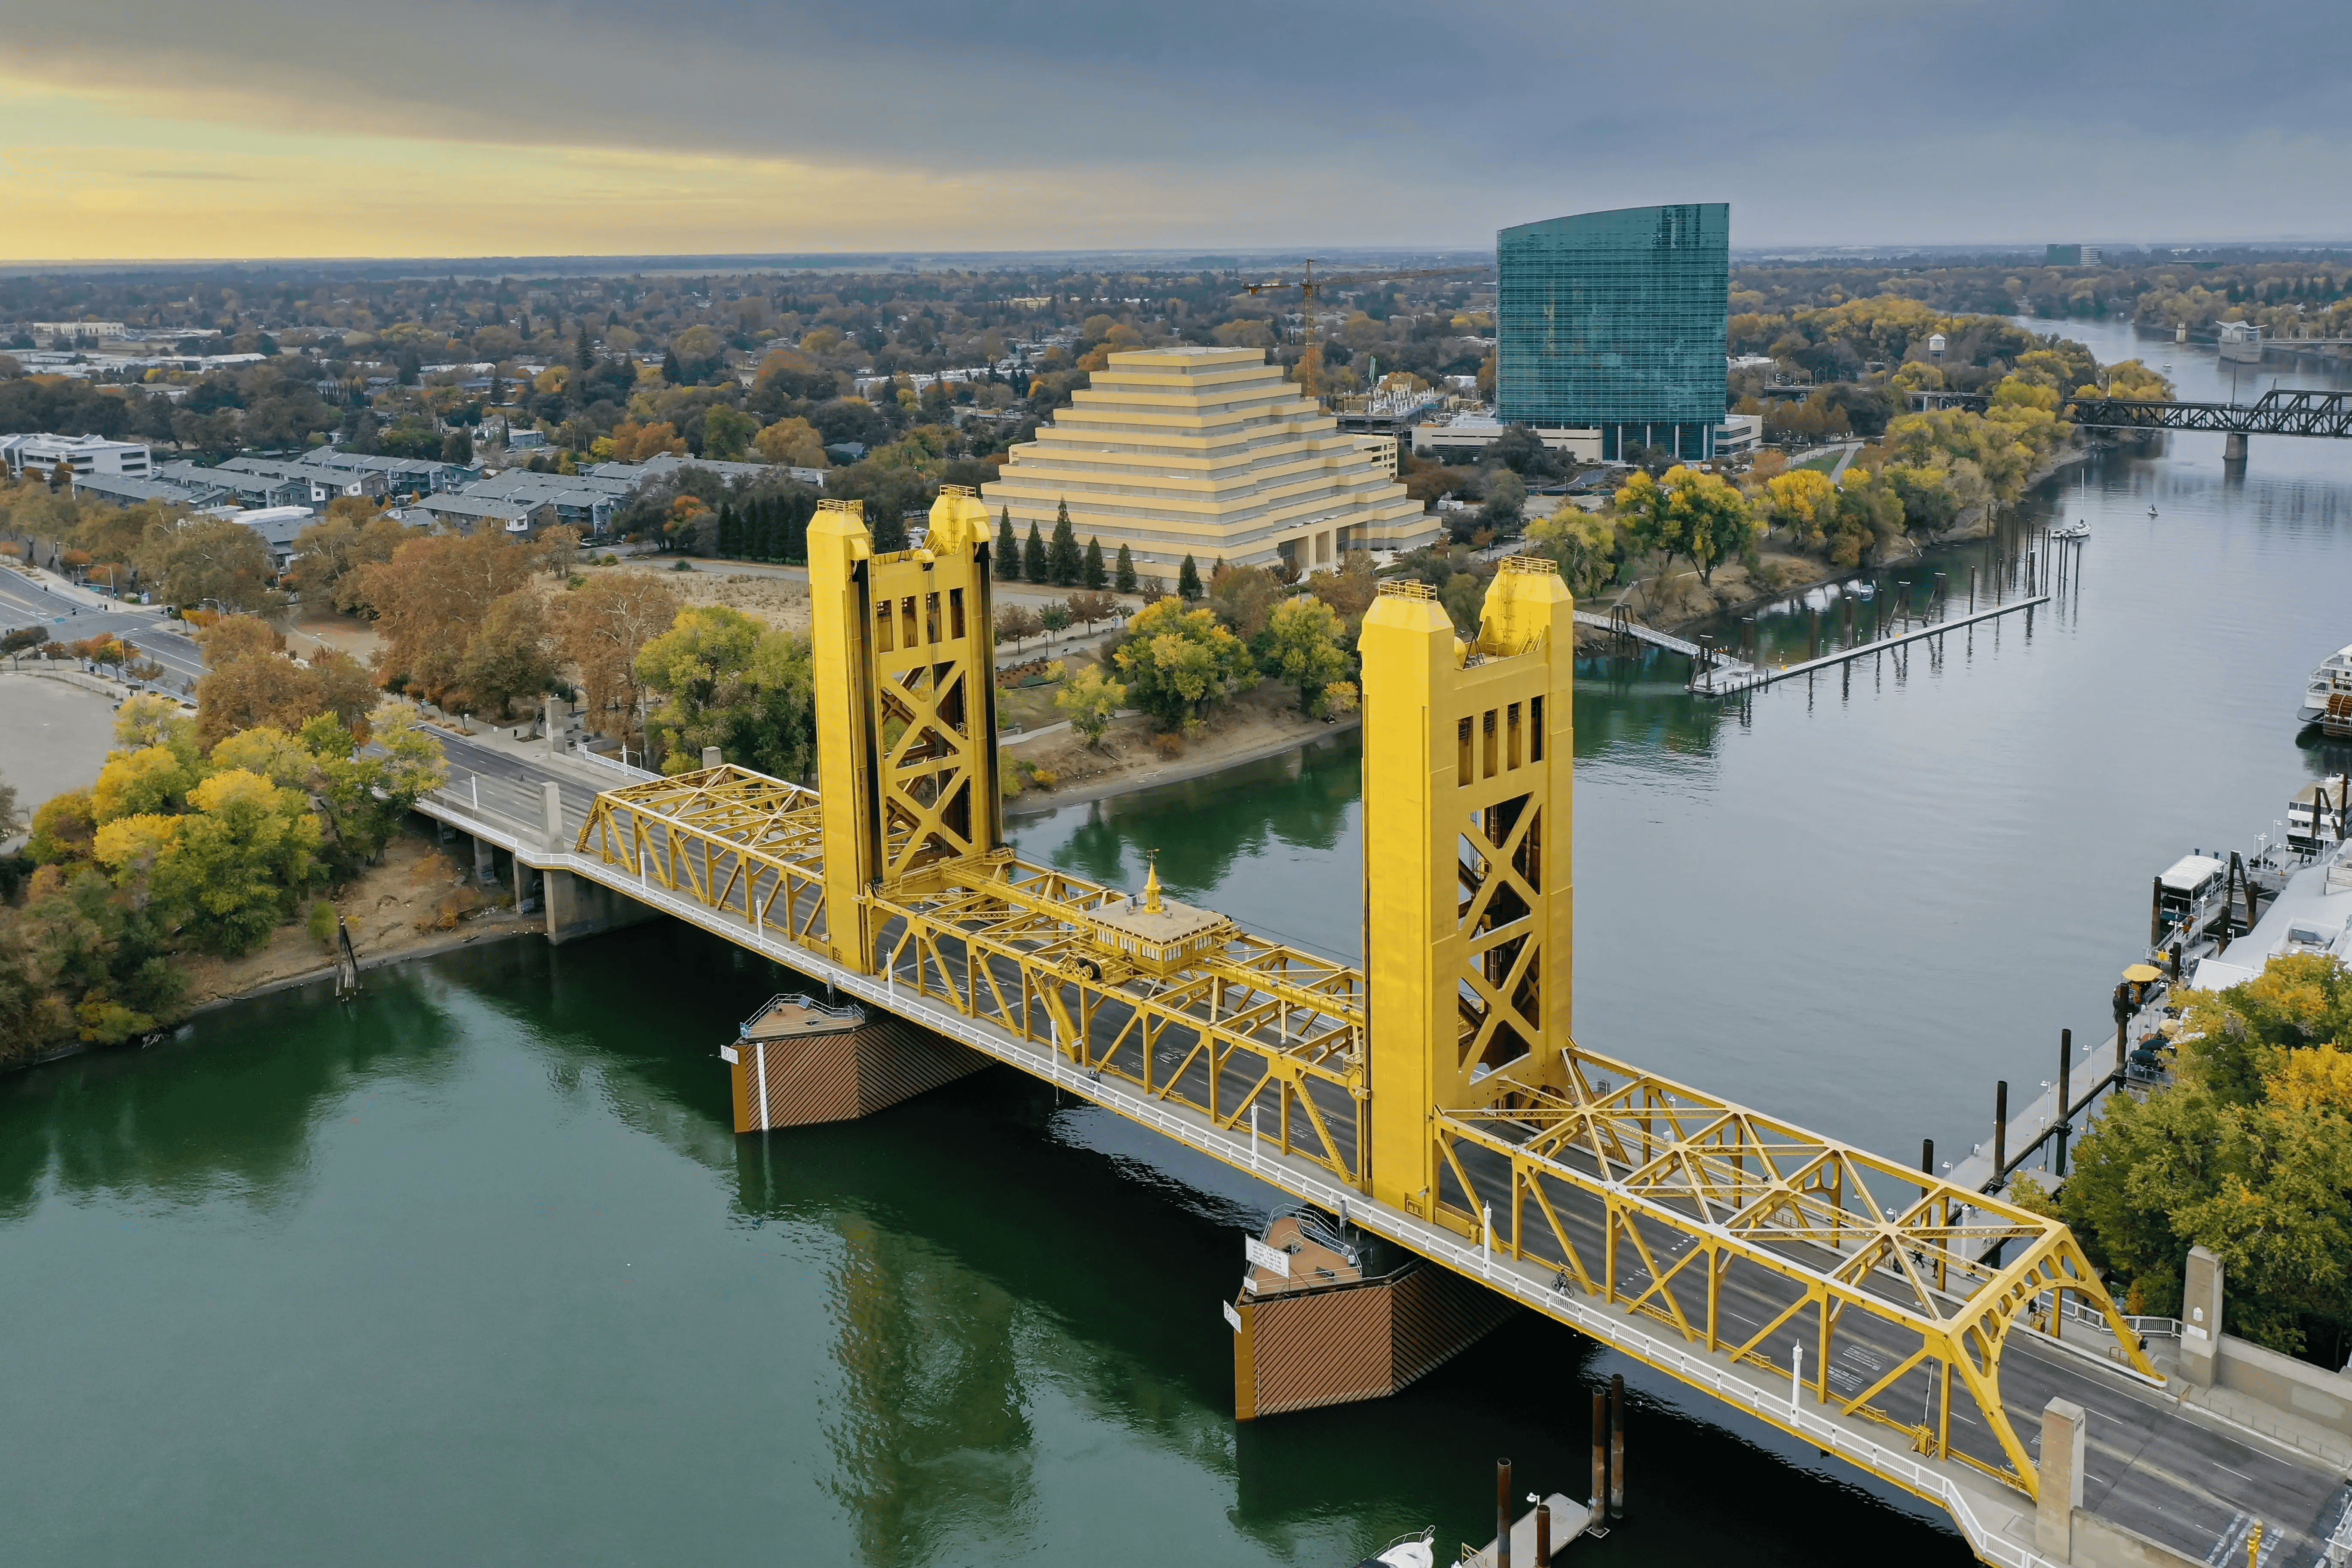 Arial view of the Guy A. West Memorial Bridge. Image by Stephen Leonardi.